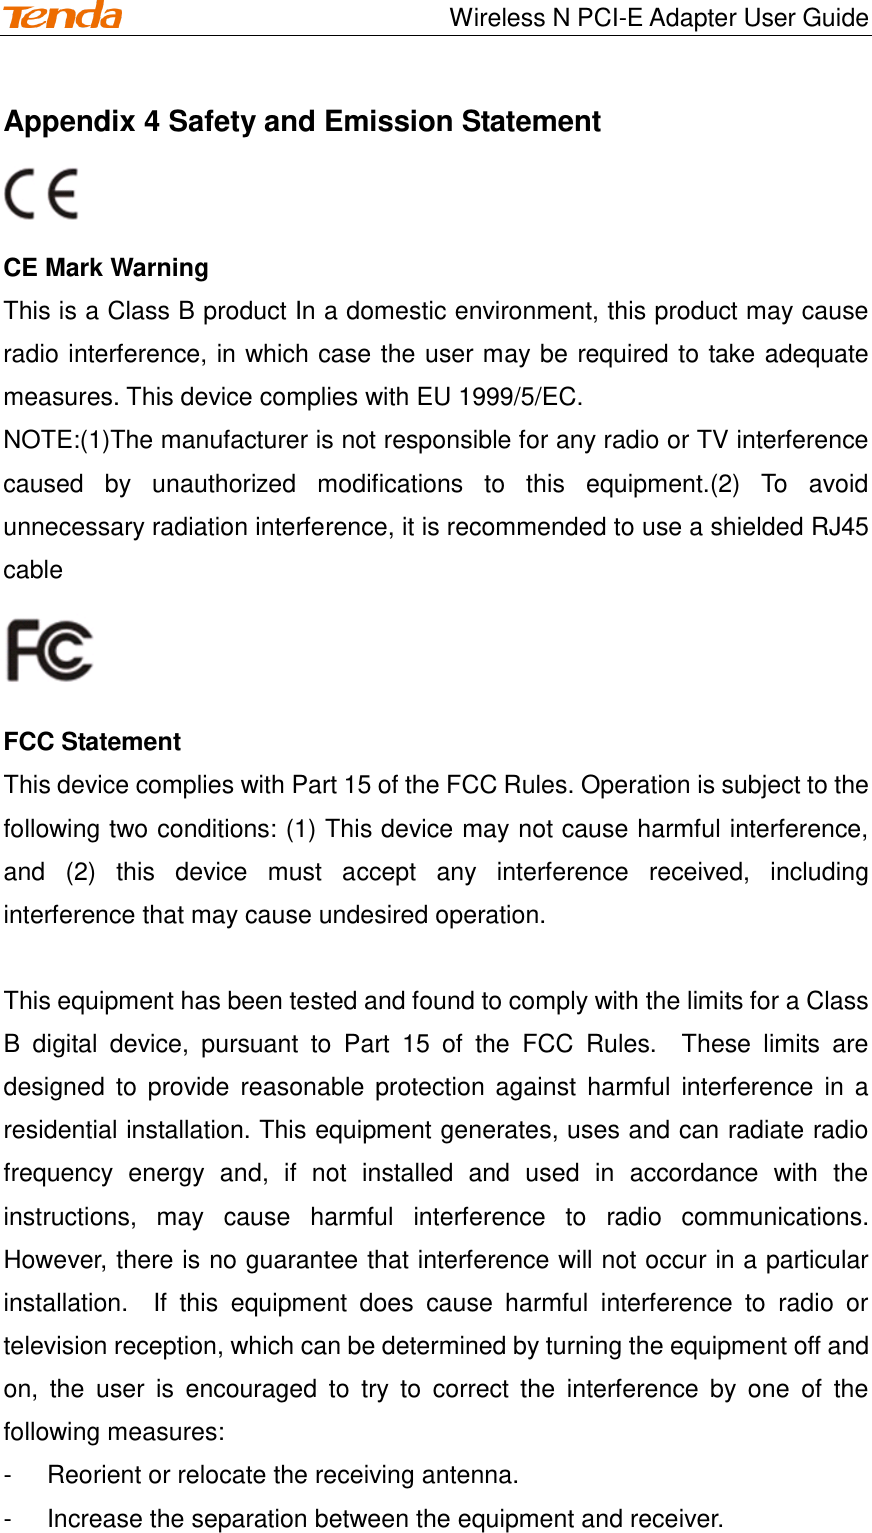                                    Wireless N PCI-E Adapter User Guide Appendix 4 Safety and Emission Statement   CE Mark Warning This is a Class B product In a domestic environment, this product may cause radio interference, in which case the user may be required to take adequate measures. This device complies with EU 1999/5/EC. NOTE:(1)The manufacturer is not responsible for any radio or TV interference caused  by  unauthorized  modifications  to  this  equipment.(2)  To  avoid unnecessary radiation interference, it is recommended to use a shielded RJ45 cable    FCC Statement This device complies with Part 15 of the FCC Rules. Operation is subject to the following two conditions: (1) This device may not cause harmful interference, and  (2)  this  device  must  accept  any  interference  received,  including interference that may cause undesired operation.  This equipment has been tested and found to comply with the limits for a Class B  digital  device,  pursuant  to  Part  15  of  the  FCC  Rules.    These  limits  are designed  to  provide reasonable  protection against  harmful  interference  in  a residential installation. This equipment generates, uses and can radiate radio frequency  energy  and,  if  not  installed  and  used  in  accordance  with  the instructions,  may  cause  harmful  interference  to  radio  communications.   However, there is no guarantee that interference will not occur in a particular installation.    If  this  equipment  does  cause  harmful  interference  to  radio  or television reception, which can be determined by turning the equipment off and on,  the  user  is  encouraged  to  try  to  correct  the  interference  by  one  of  the following measures: -  Reorient or relocate the receiving antenna. -  Increase the separation between the equipment and receiver. 